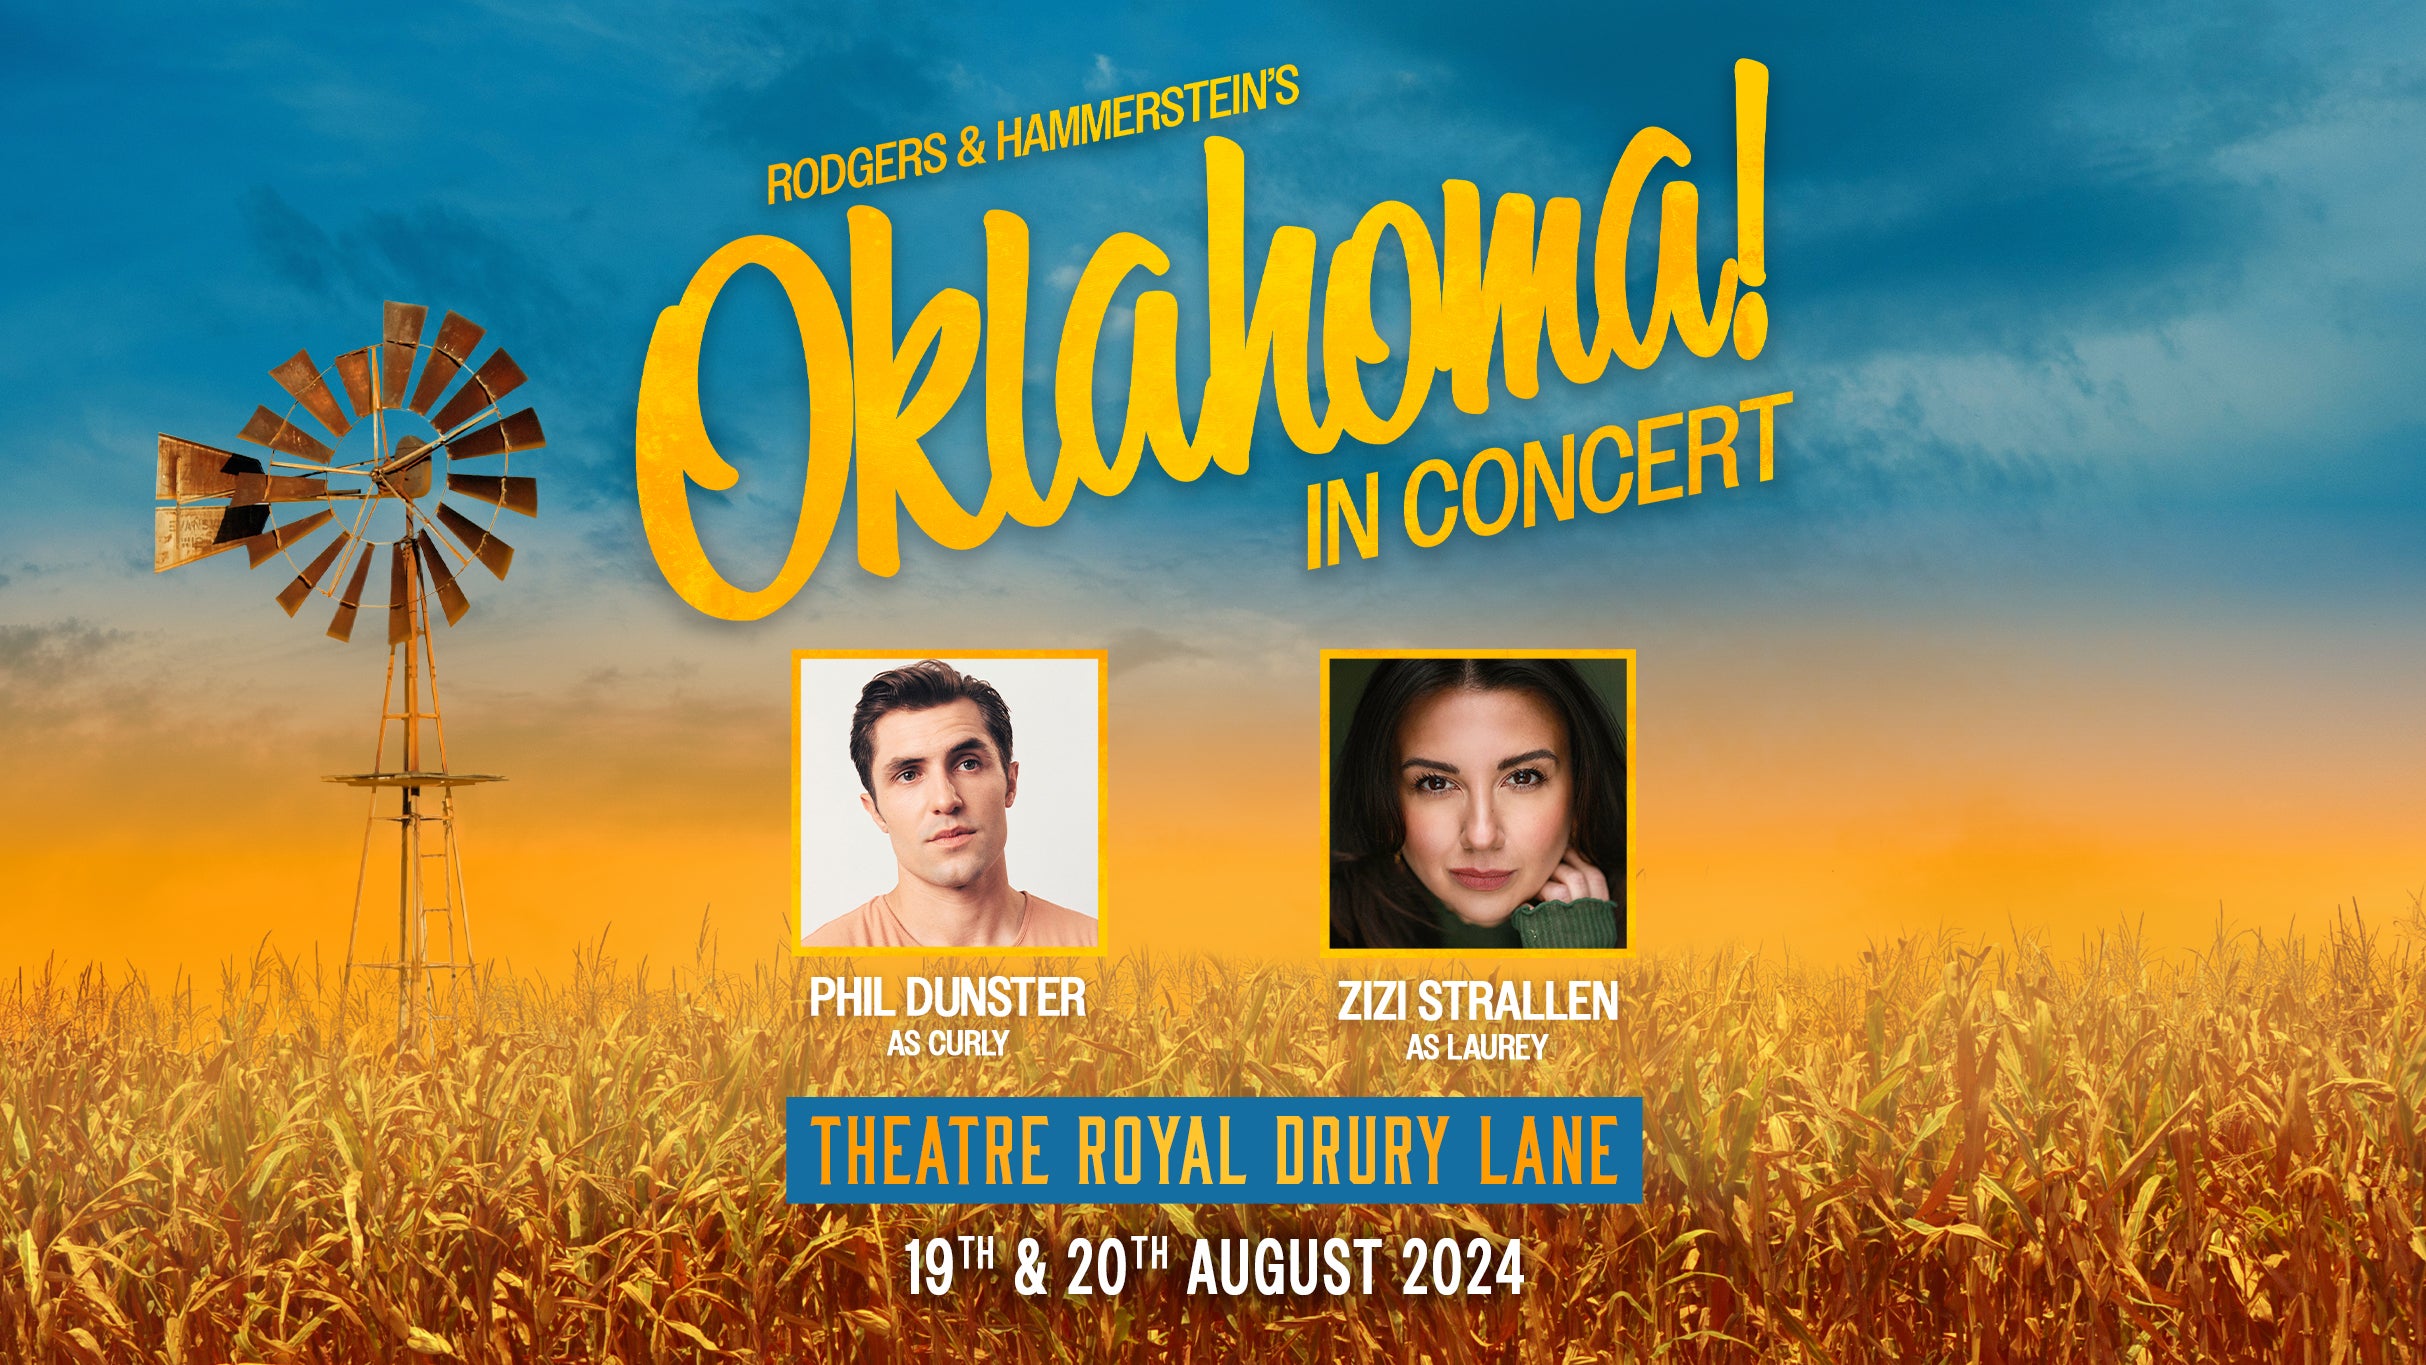 Rodgers & Hammerstein's Oklahoma! - In Concert in London promo photo for Ticketmaster presale offer code